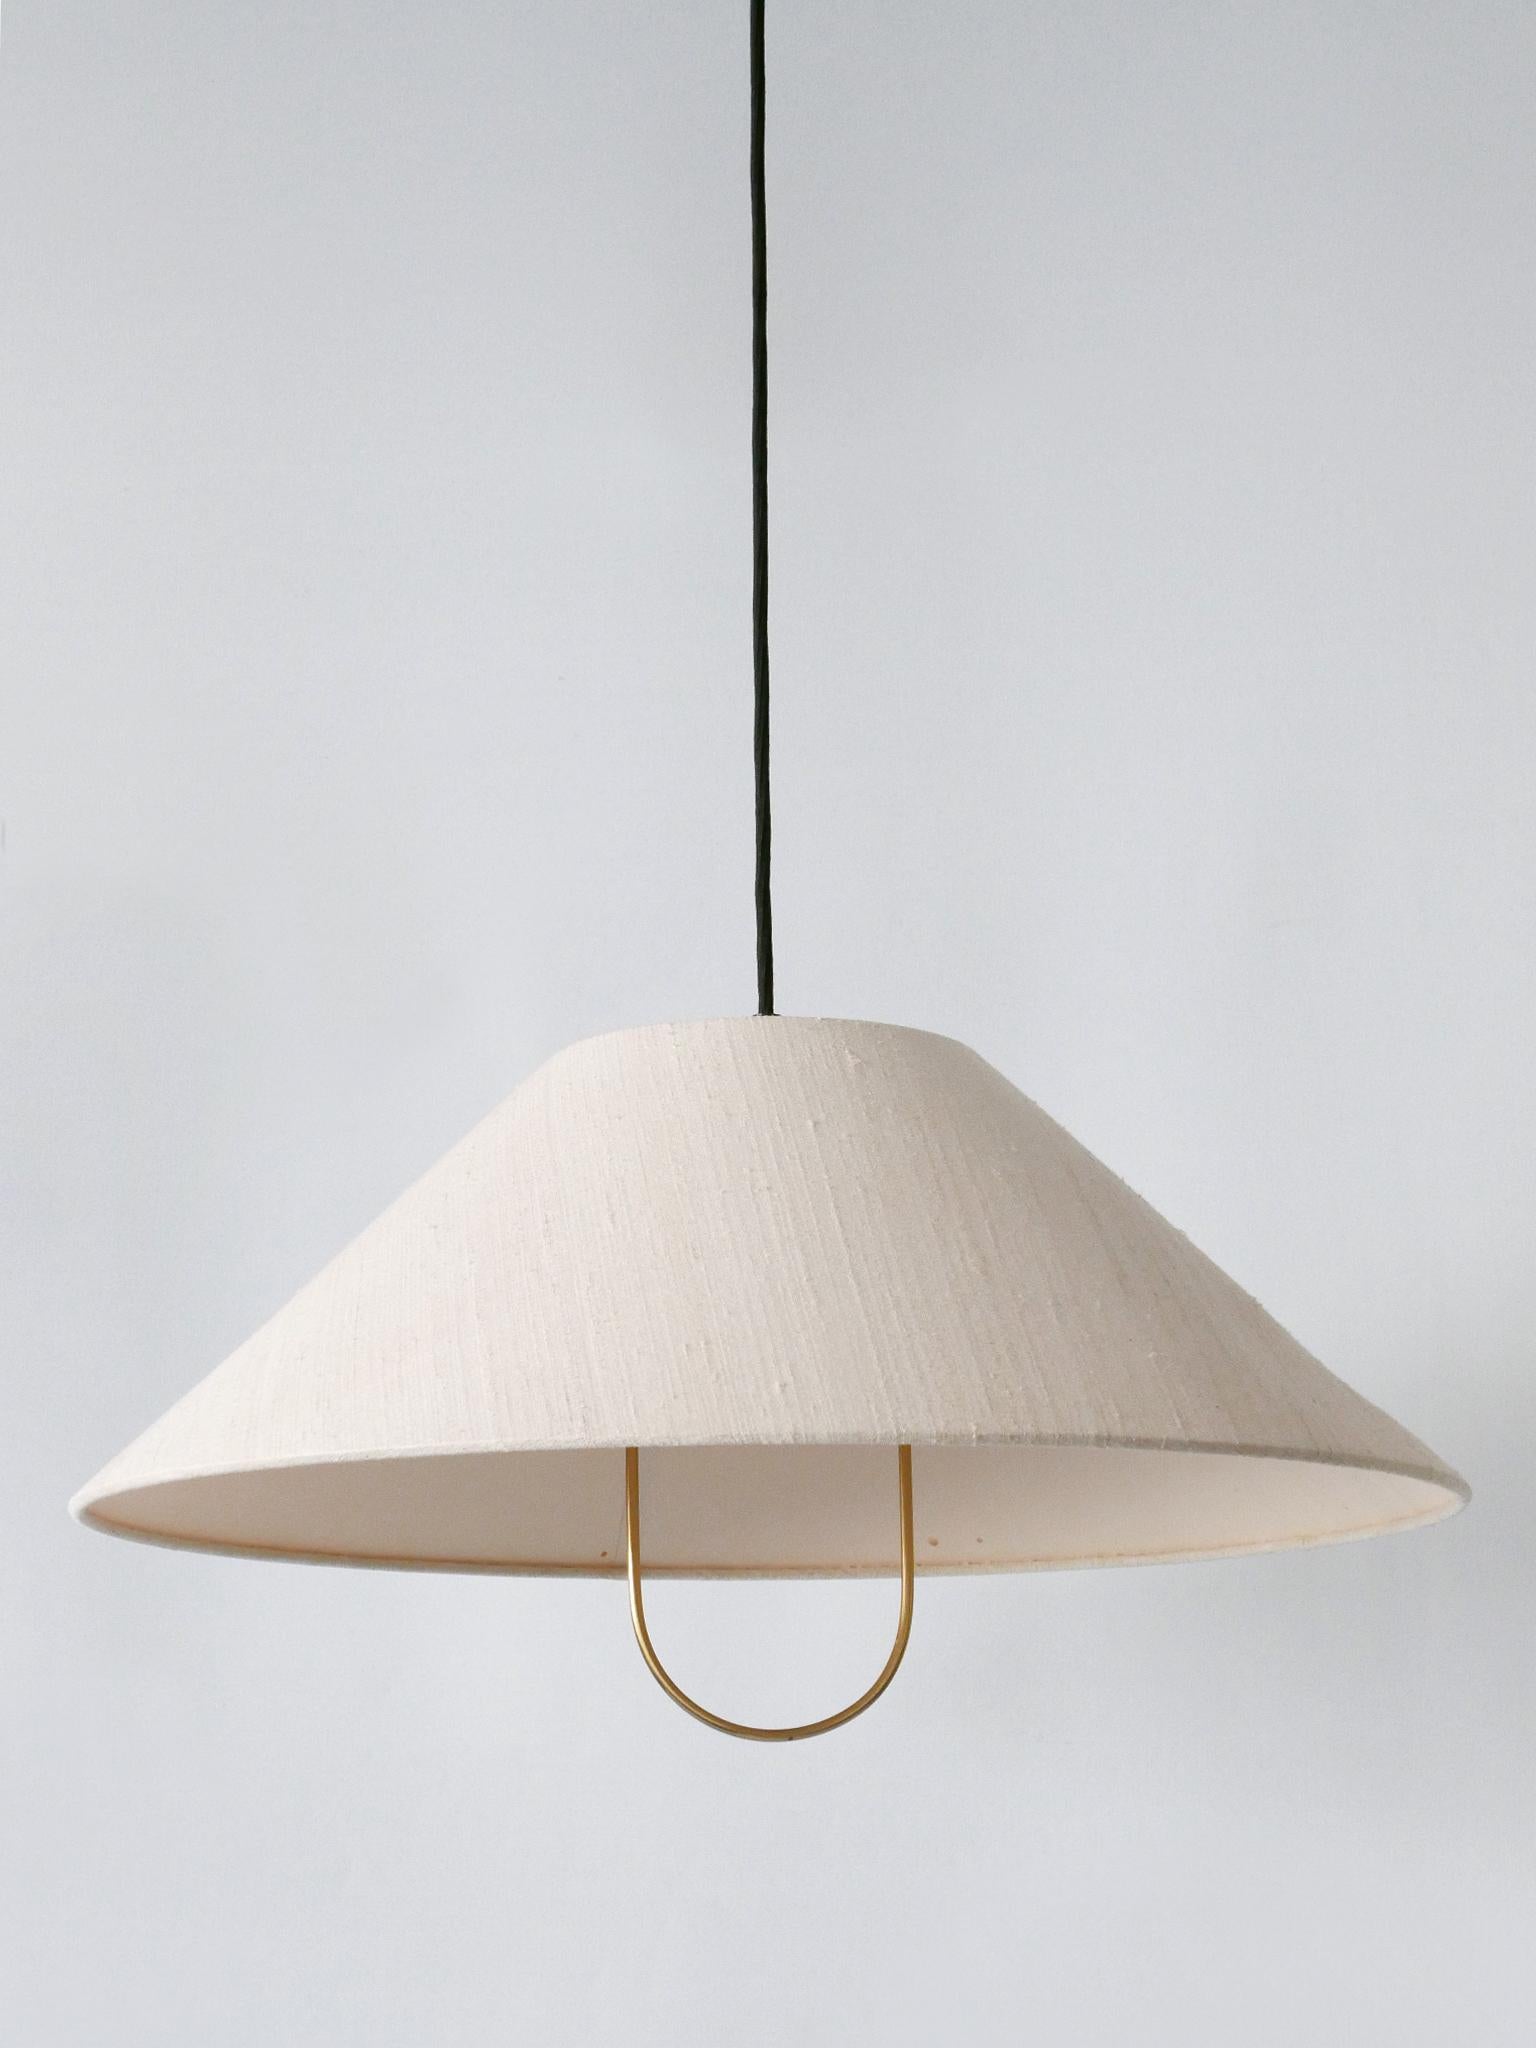 Fabric Rare & Early Counterweight Pendant Lamp by Florian Schulz Germany, 1960s